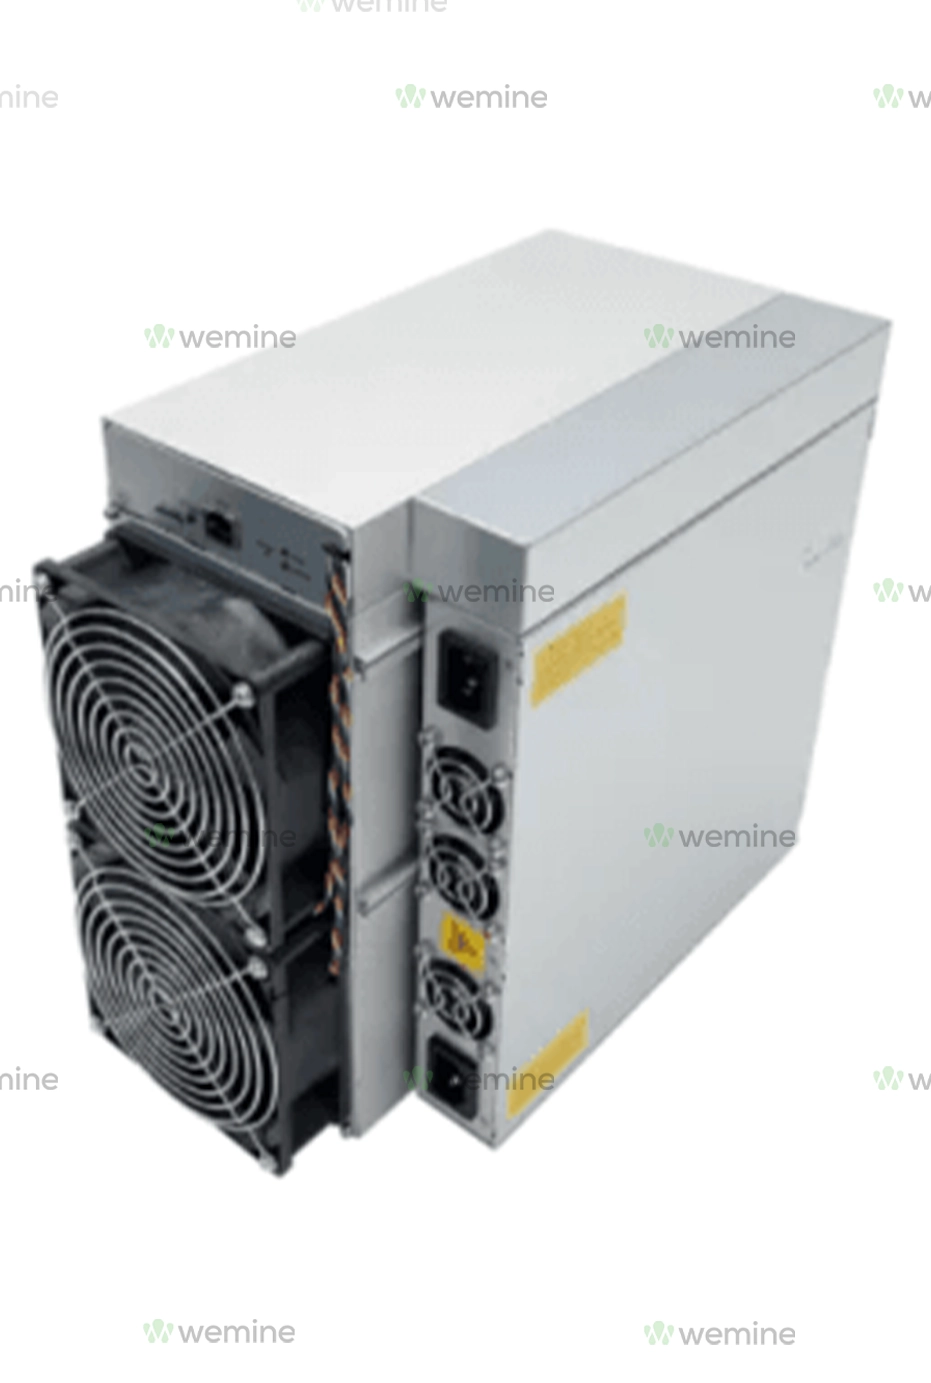 Antminer S19K Pro model with 136Th hash power, featuring prominent cooling fans and rear connectivity ports, encased in a metallic body with yellow accentuations.